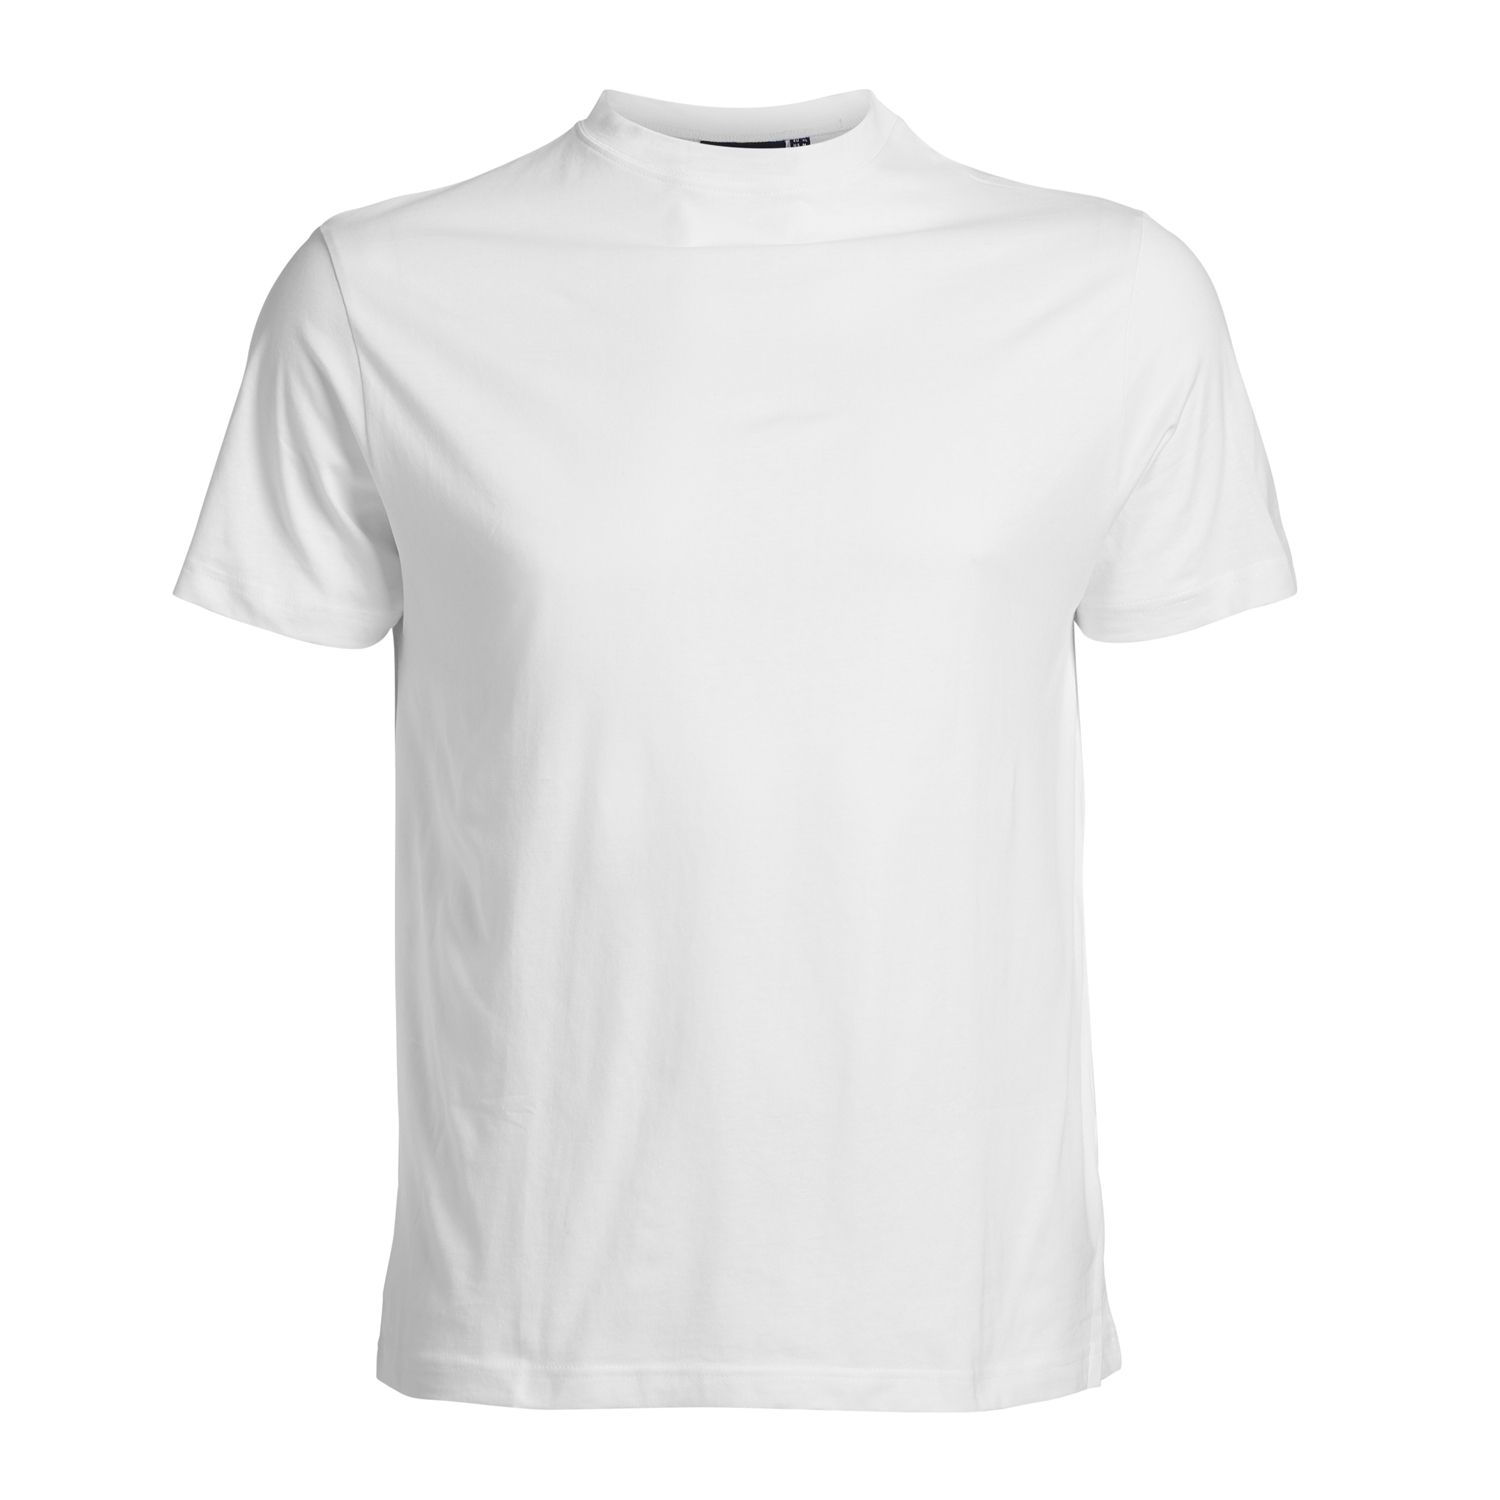 T-Shirt in white by Replika in oversizes up to 6XL // double pack